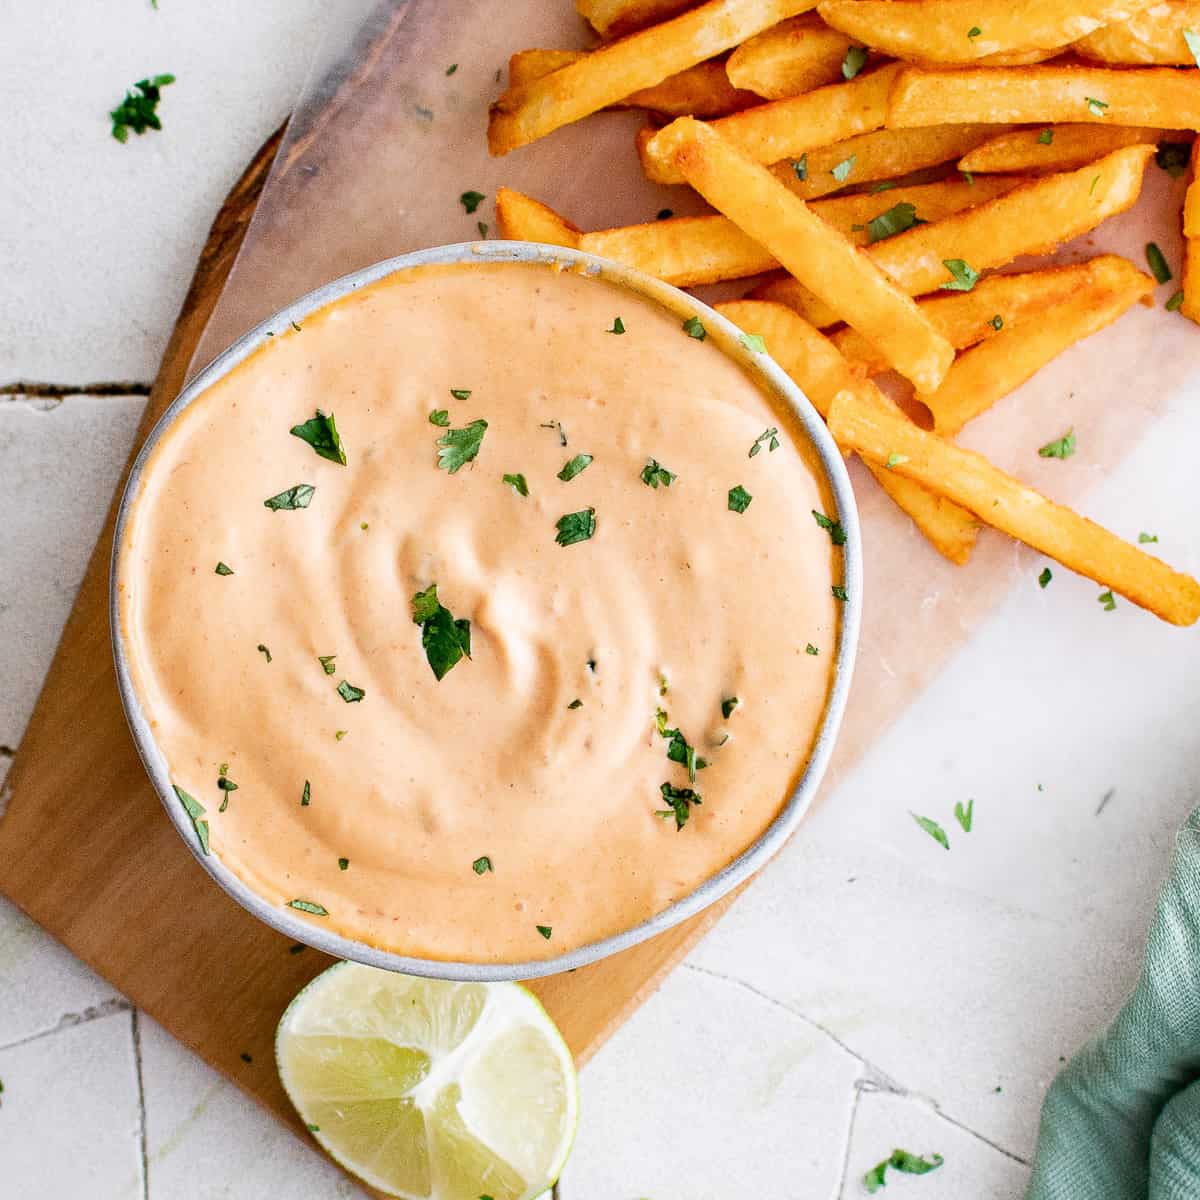 Chipotle mayo in a white bowl.